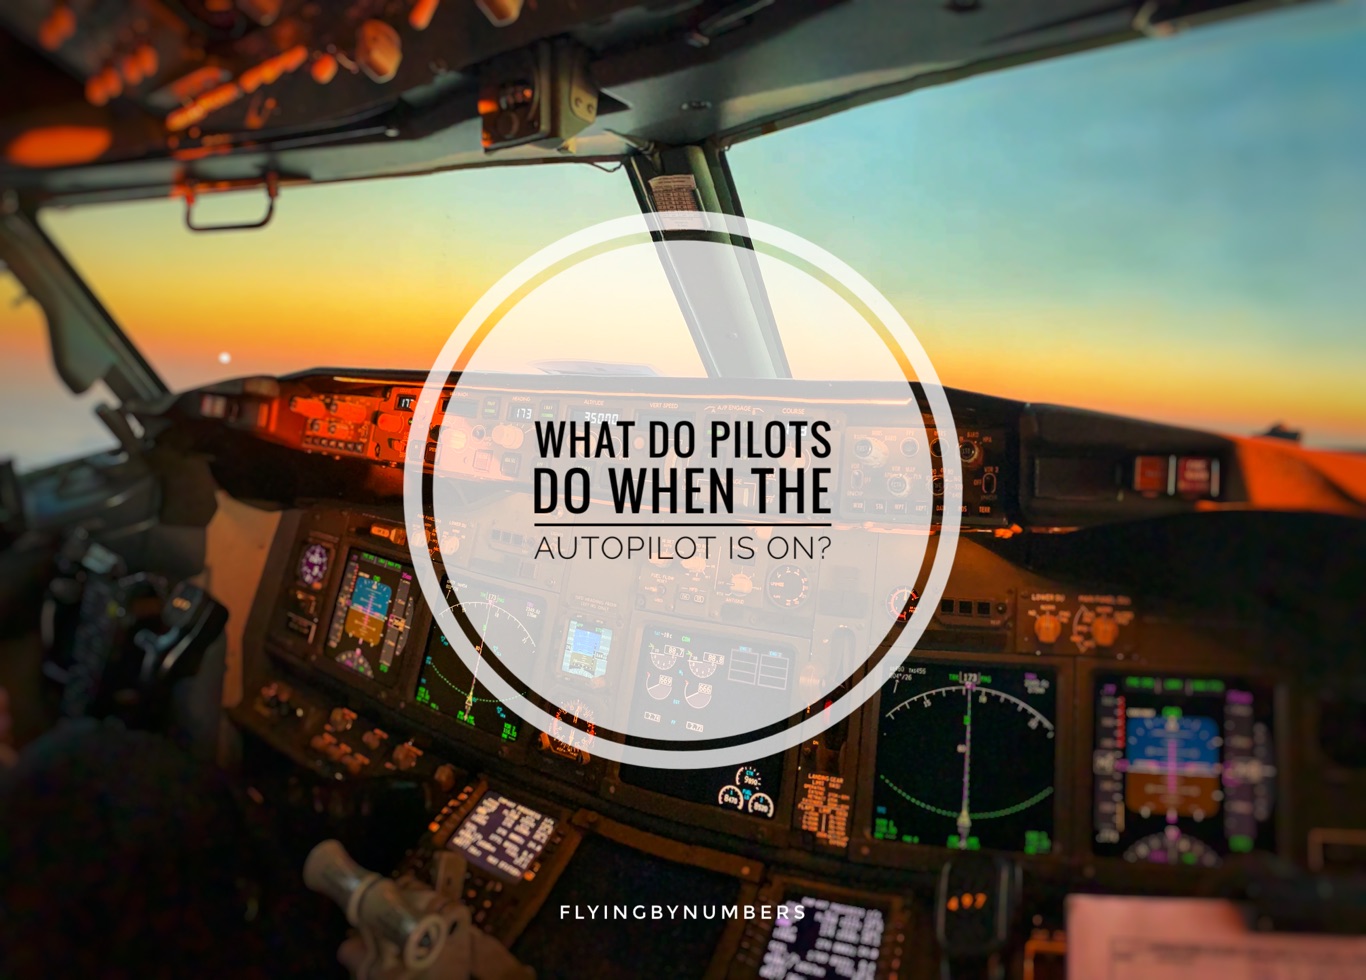 A look at what airline pilots do when the autopilot is on by flyingbynumbers